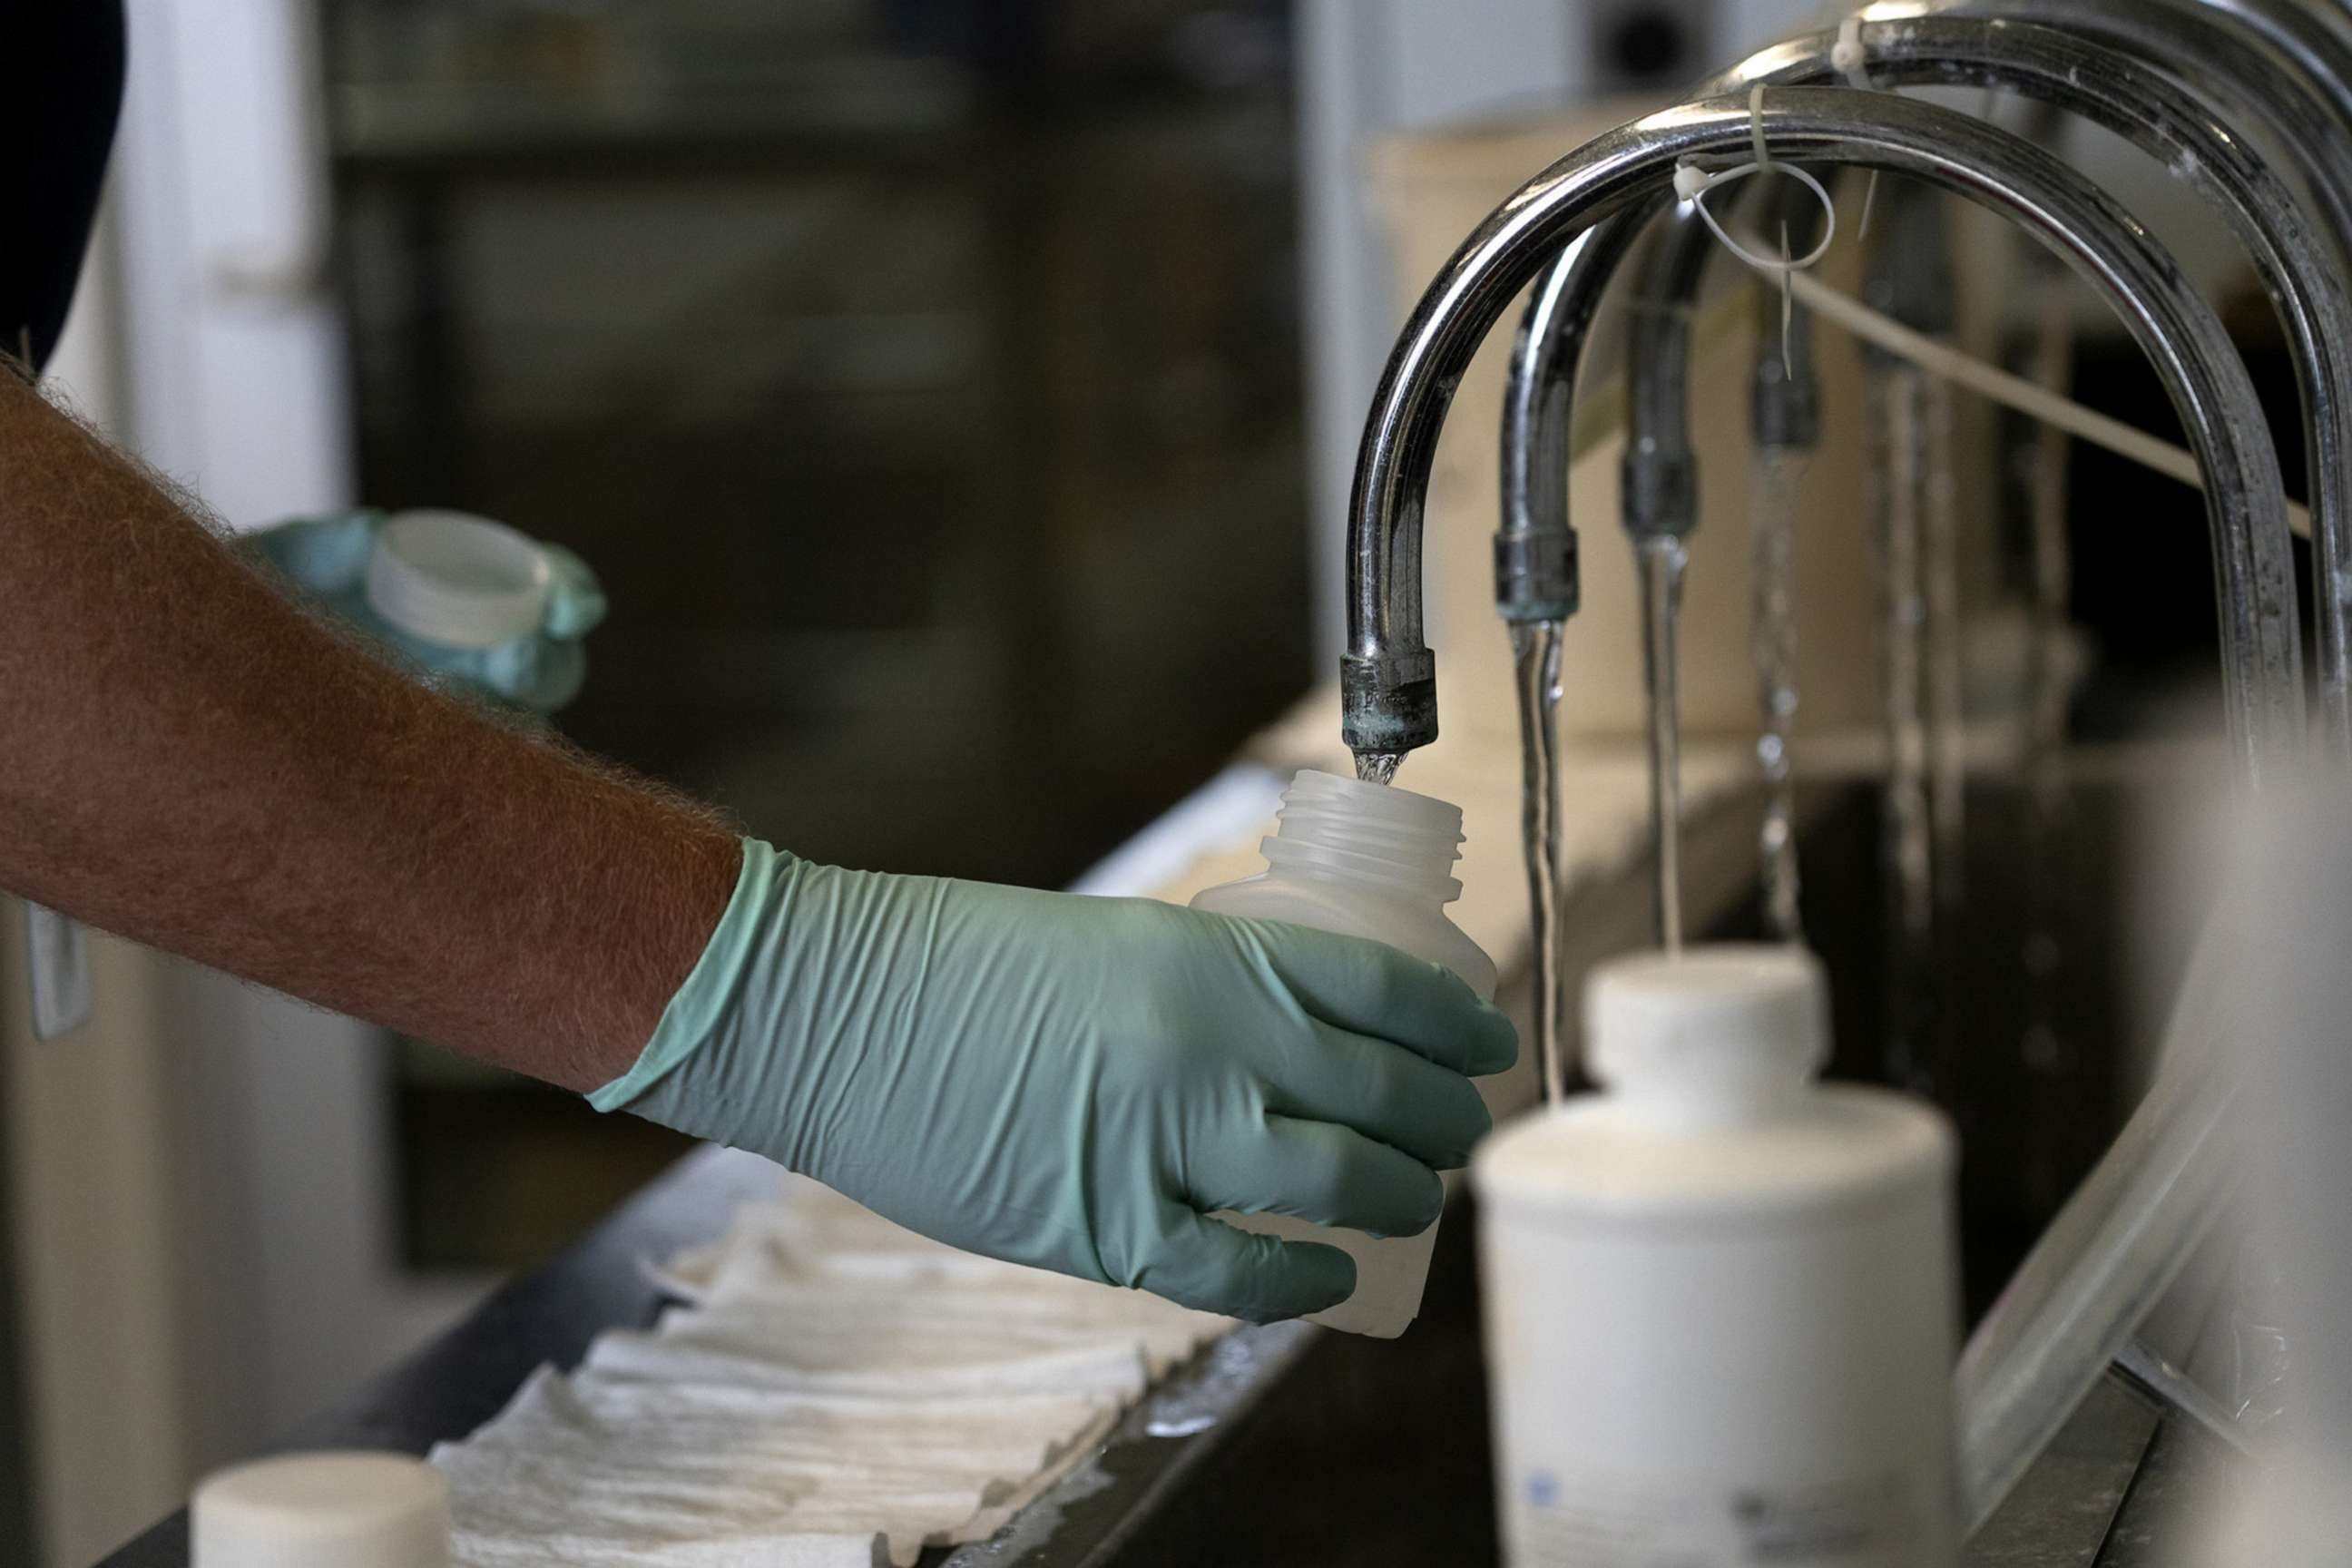 PHOTO: Geologist Ryan Bennett with the Illinois Environmental Protection Agency collects samples of treated Lake Michigan water in a laboratory at the water treatment plant in Wilmette, Illinois, July 3, 2021.